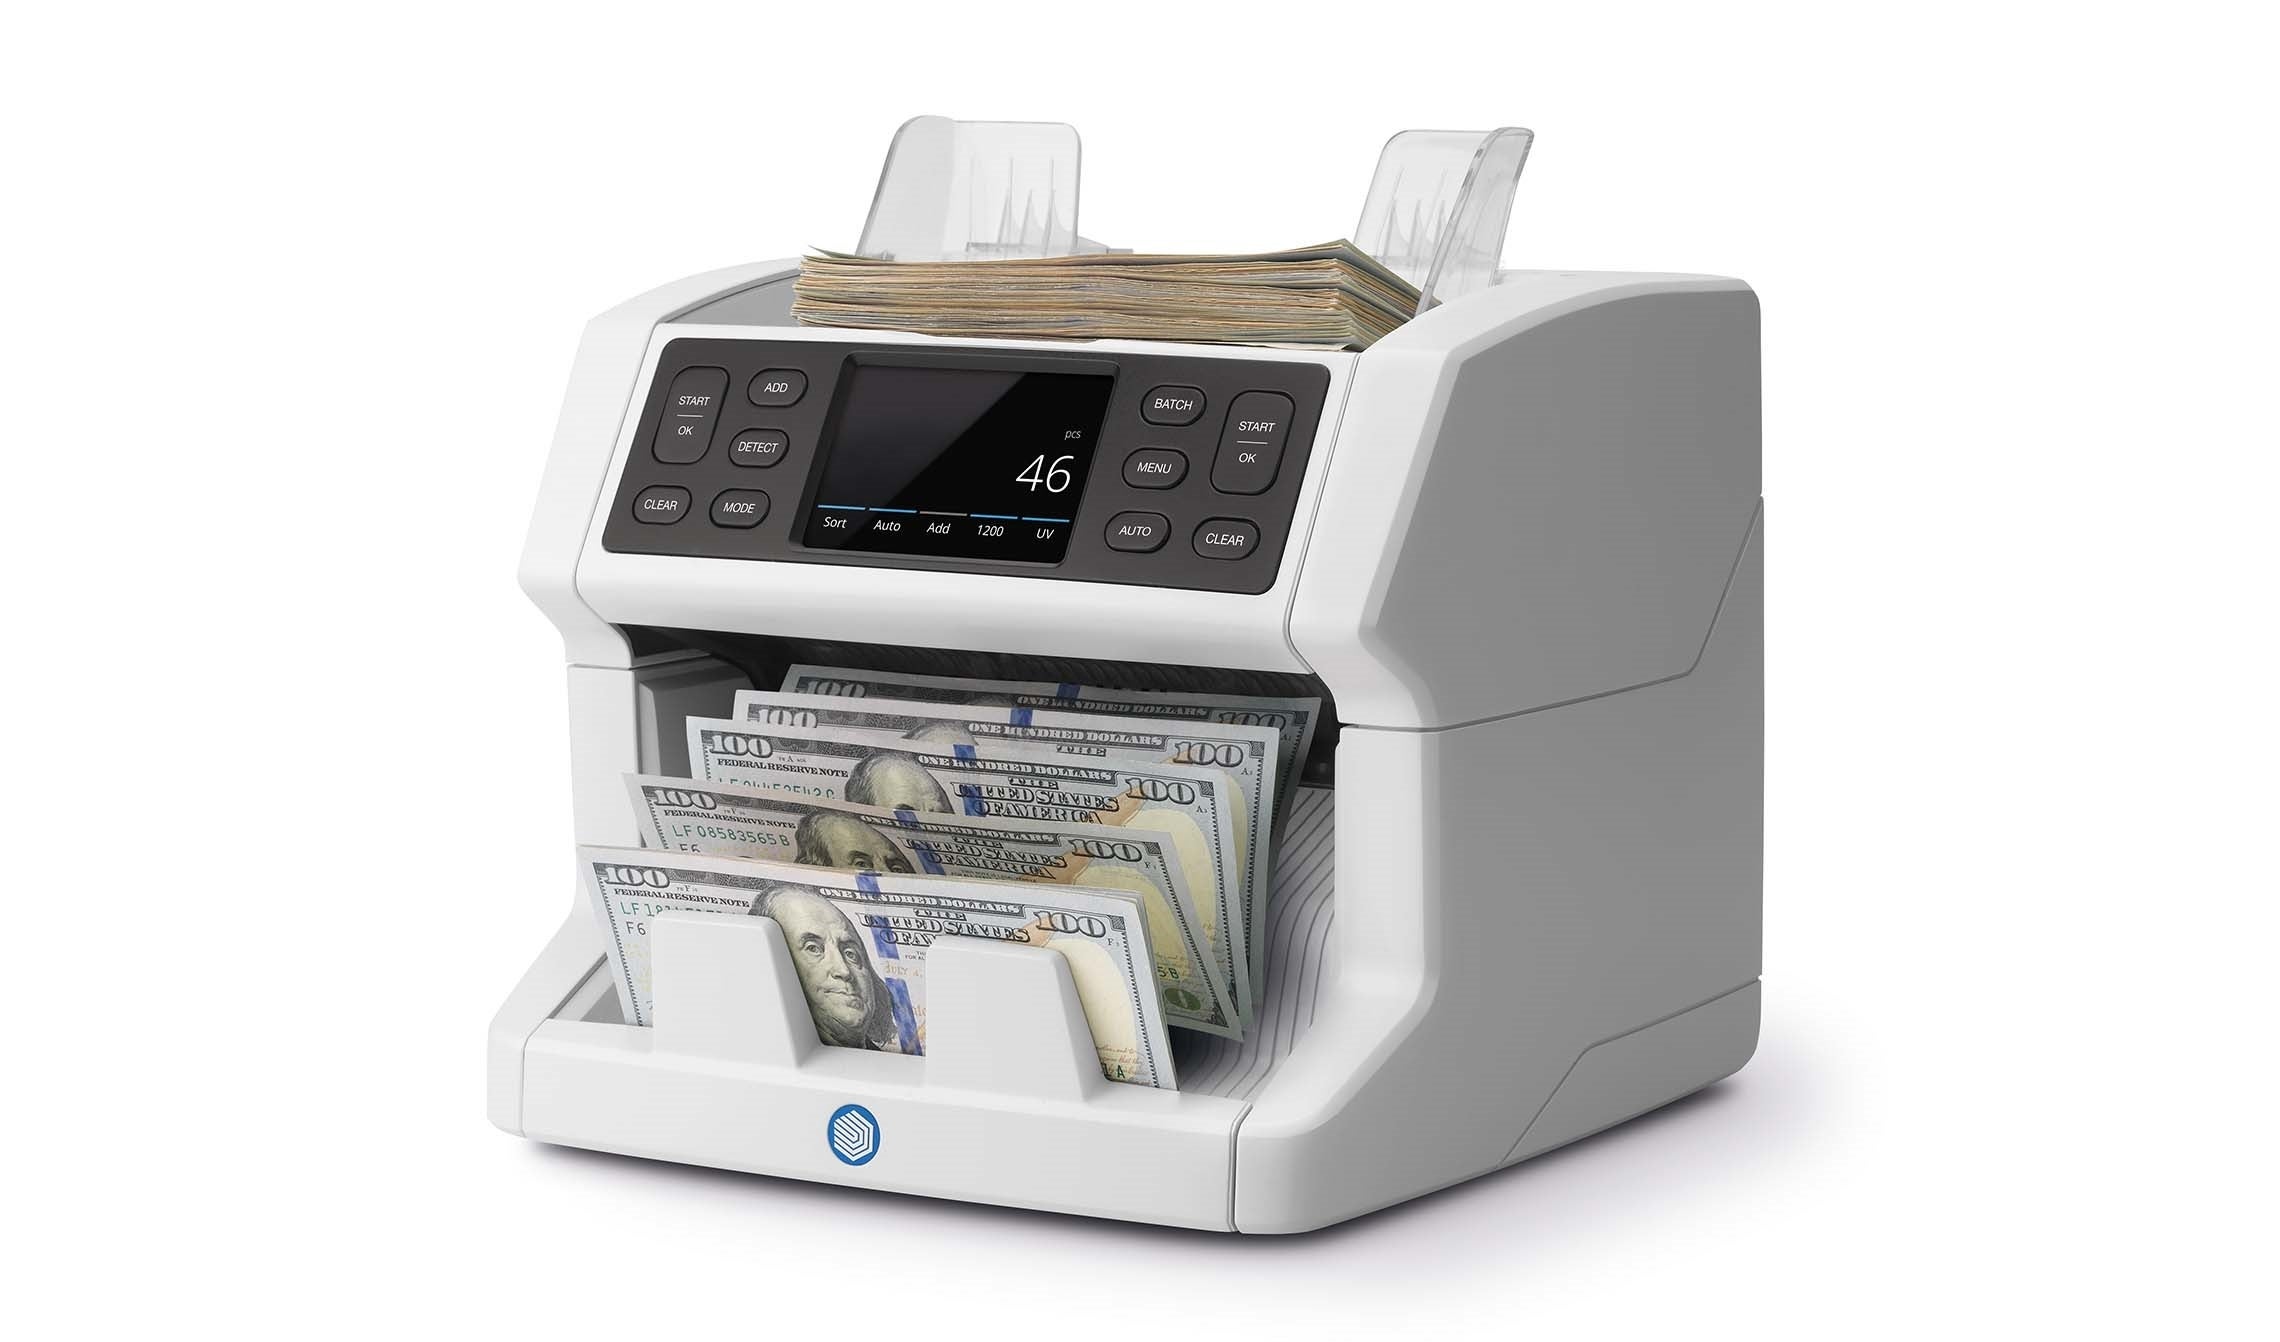 Etc Euro Money Handling Products Japan Canada British Pound LBSX Money Counter Worldwide Bill Counting Machine Detector UV/MG Counterfeit w/External Display Support Countries Such As US Dollar 